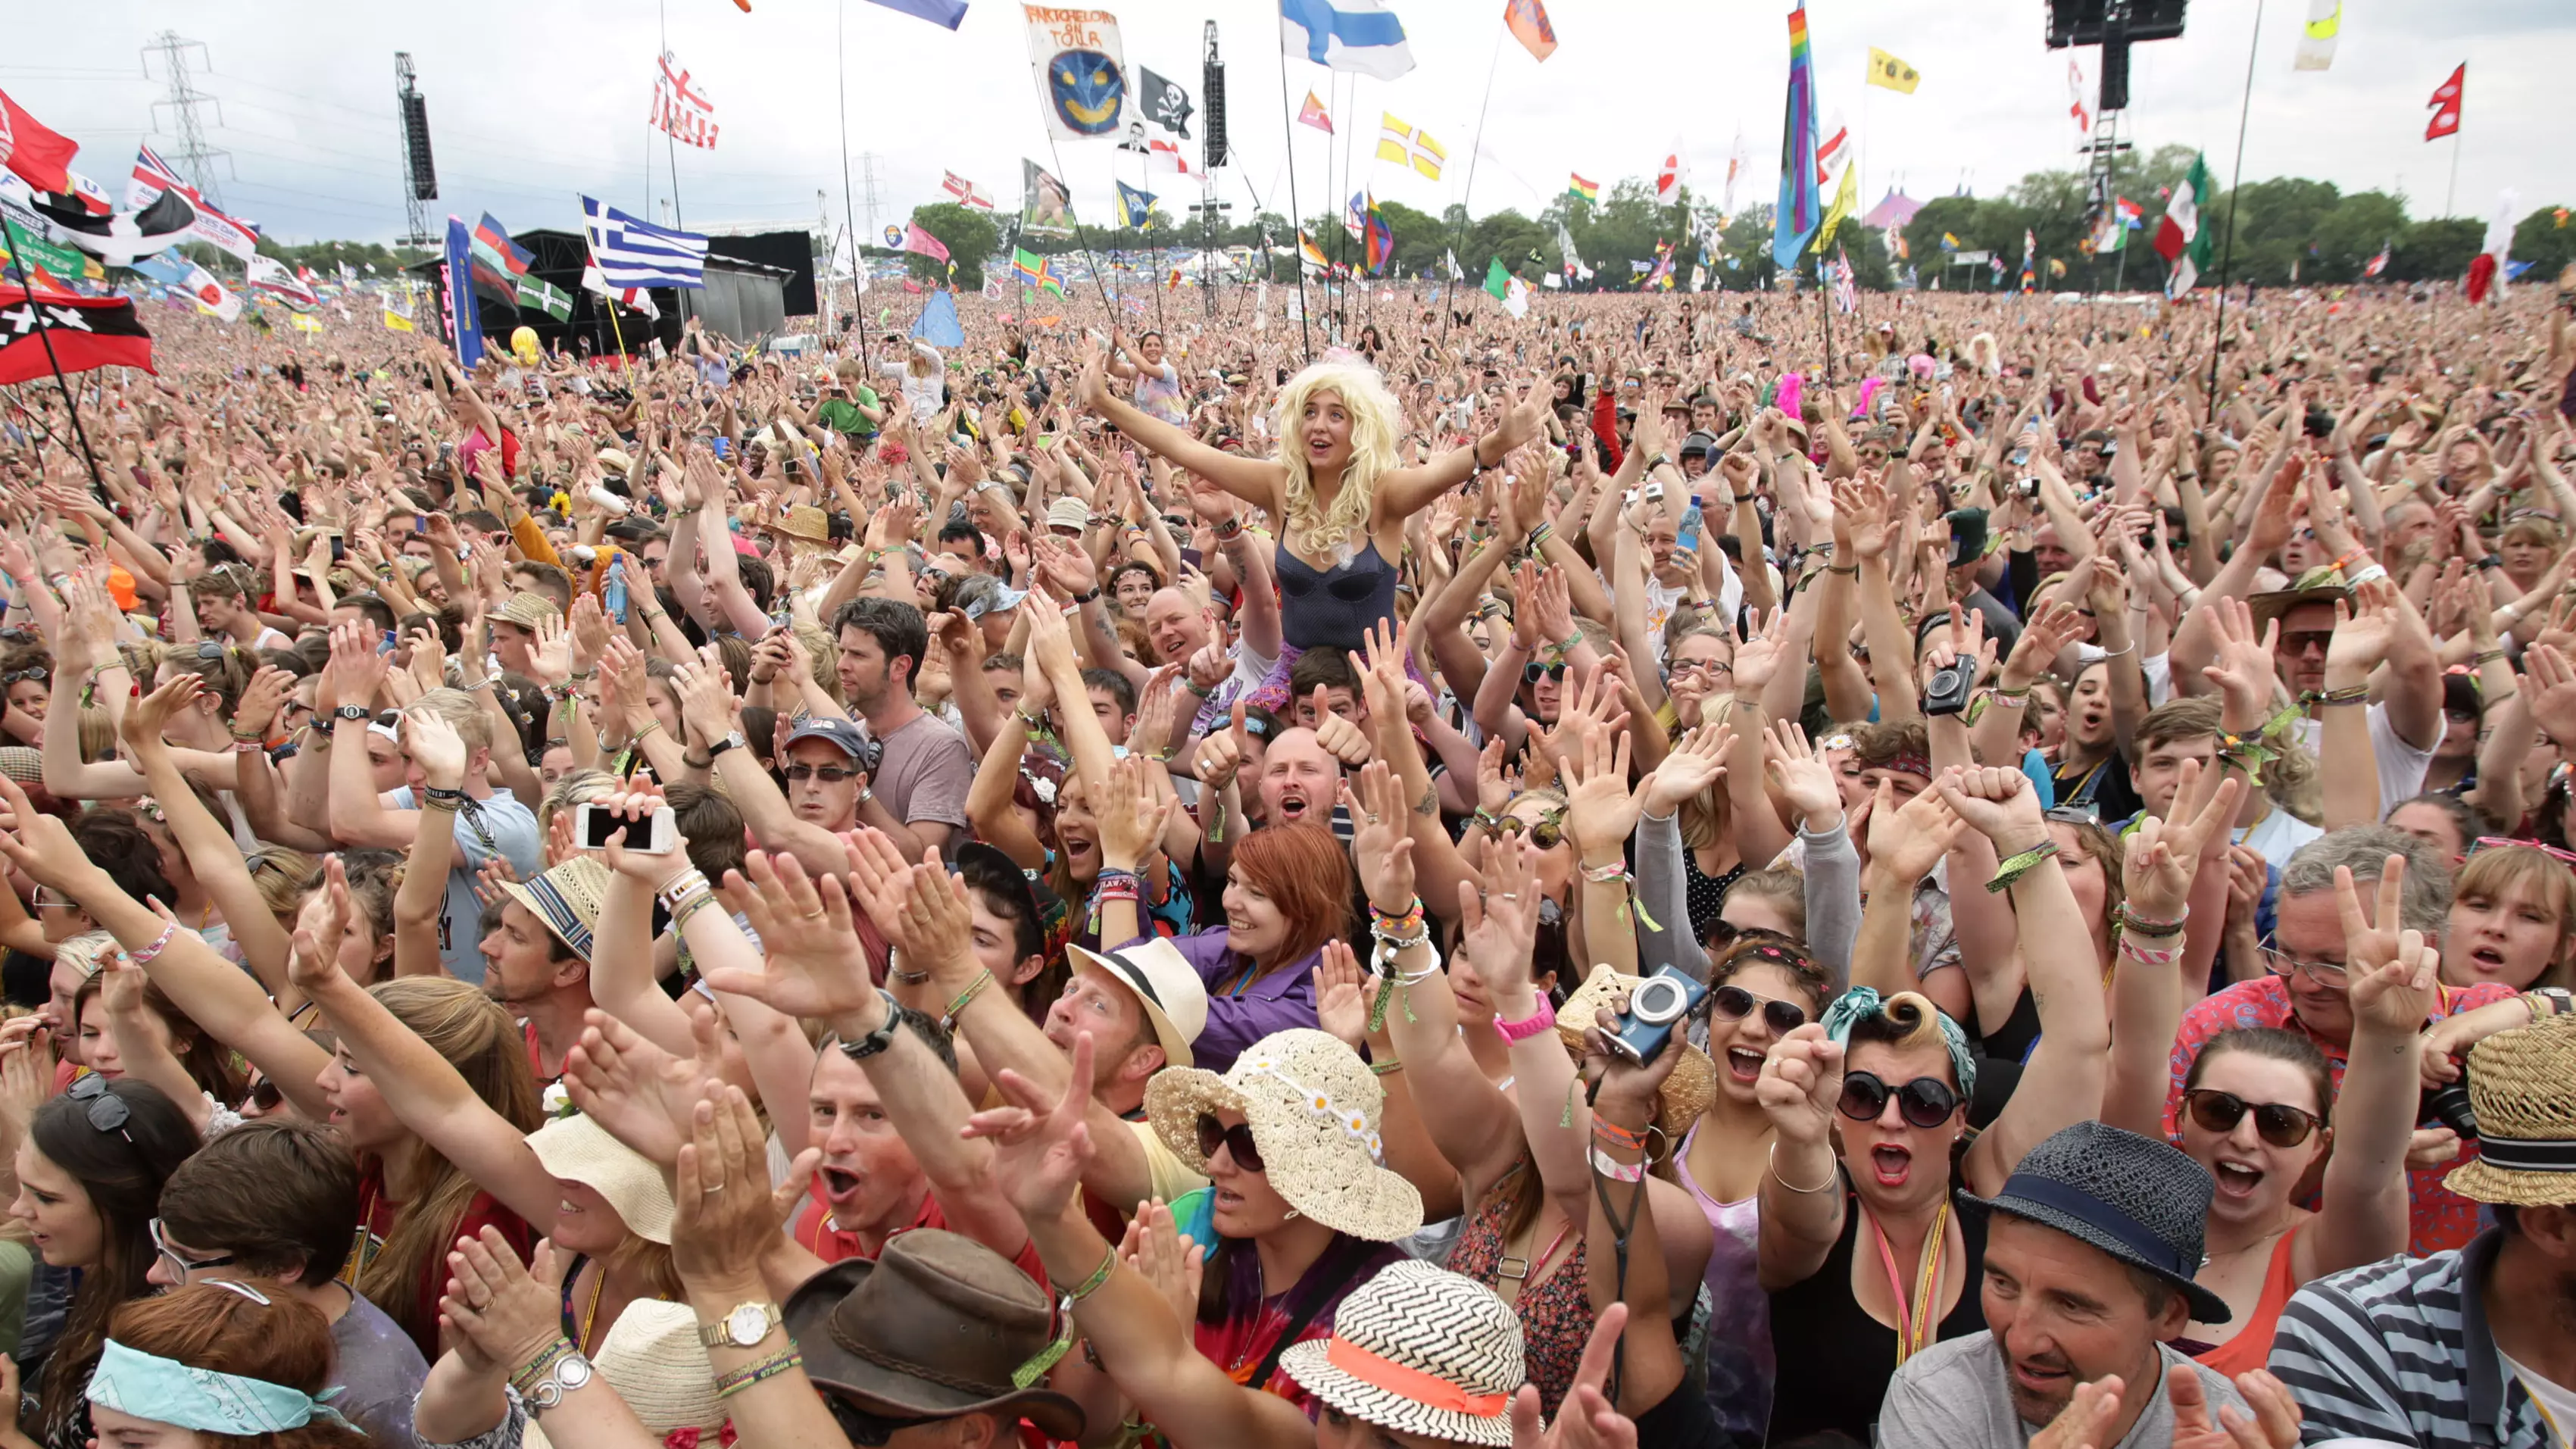 Glastonbury Weather Forecast: It's Set To Be Hotter Than Cairo In 2019